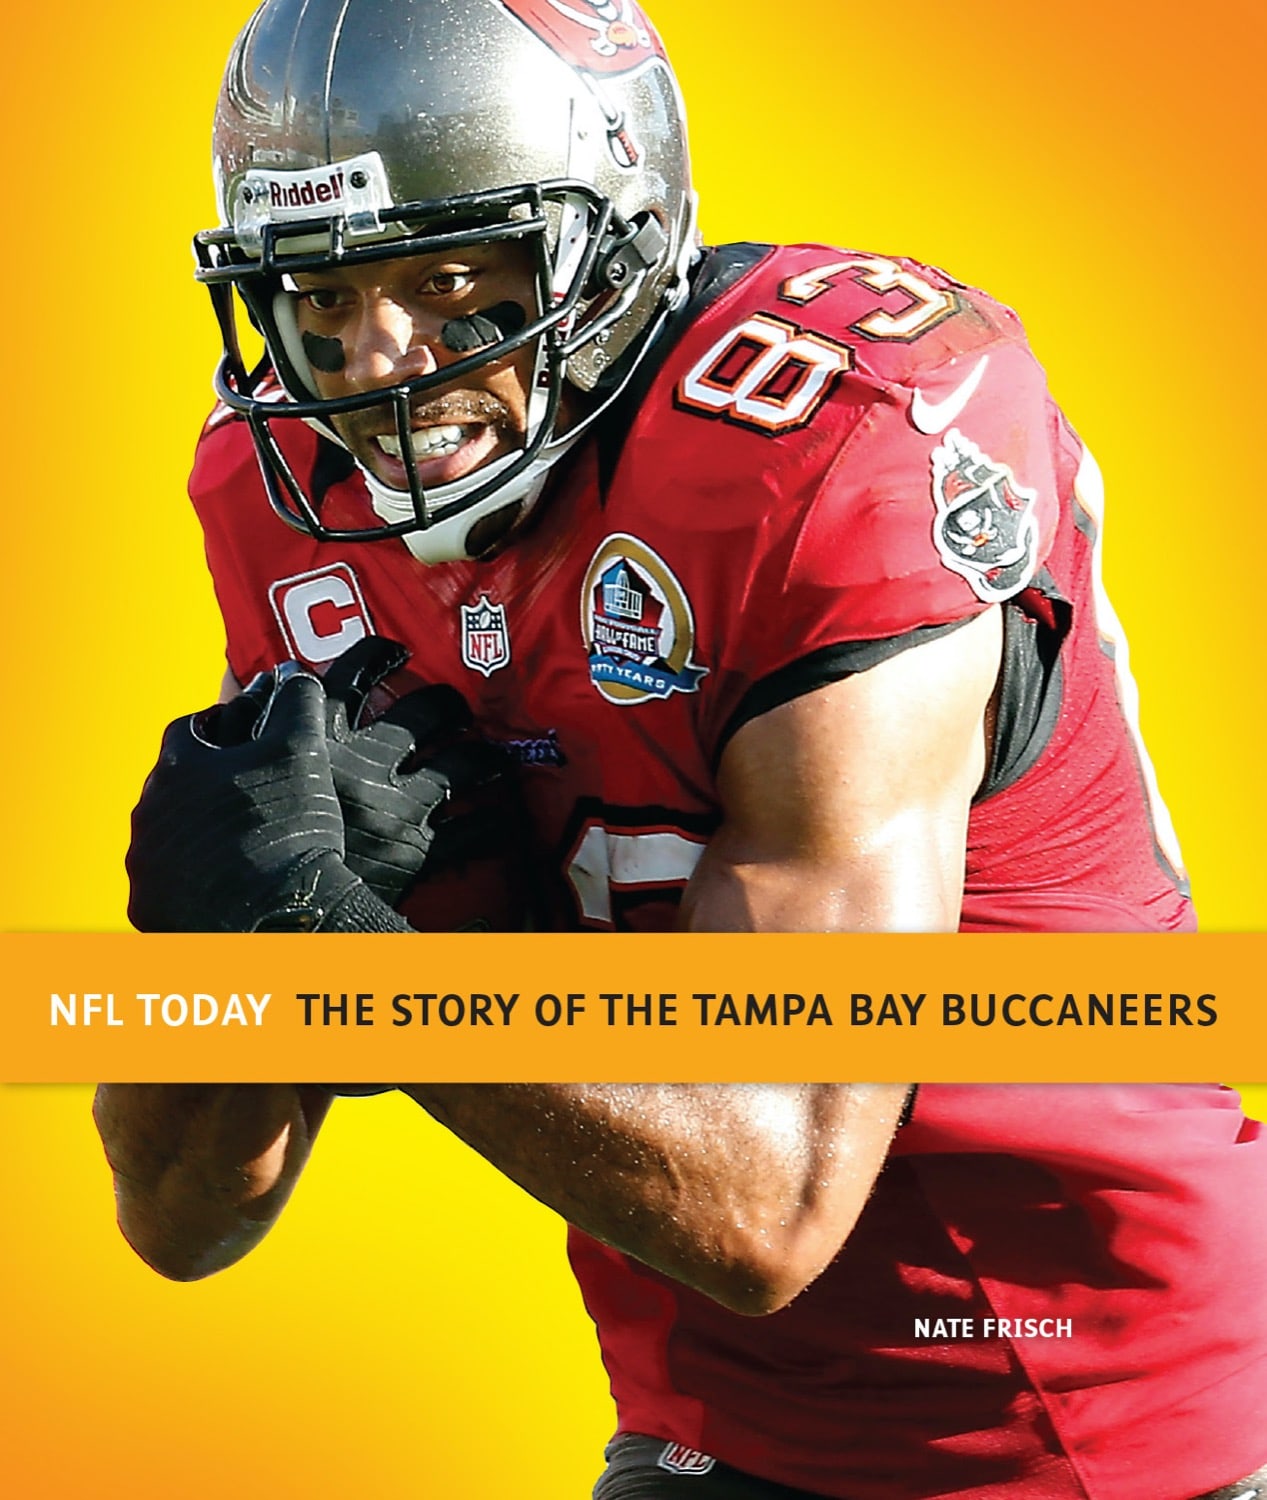 NFL Today: The Story of the Tampa Bay Buccaneers